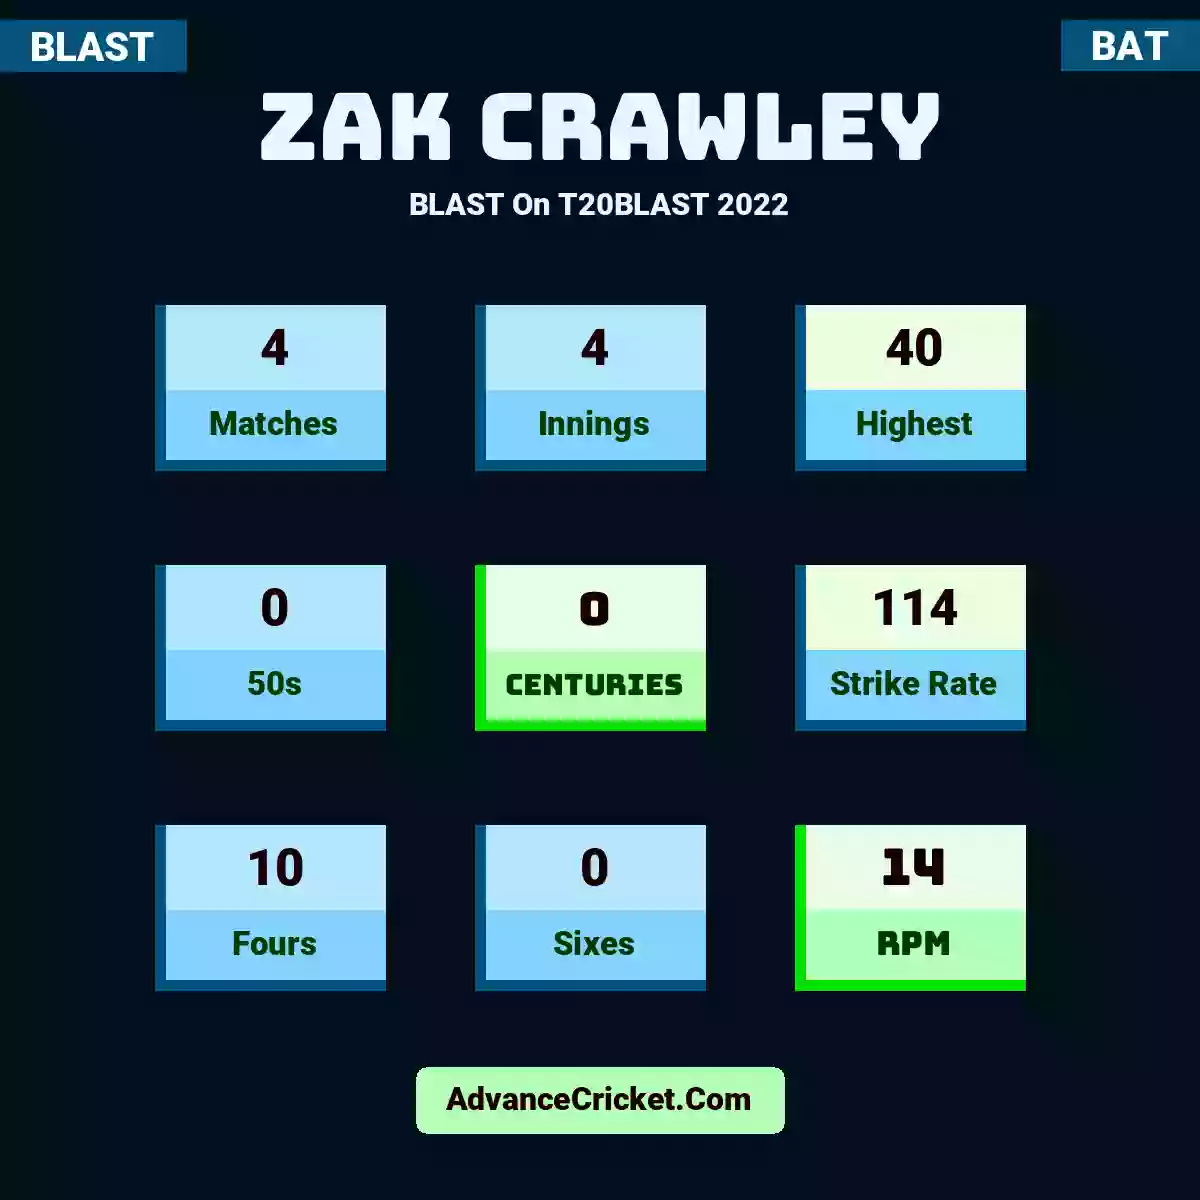 Zak Crawley BLAST  On T20BLAST 2022, Zak Crawley played 4 matches, scored 40 runs as highest, 0 half-centuries, and 0 centuries, with a strike rate of 114. Z.Crawley hit 10 fours and 0 sixes, with an RPM of 14.